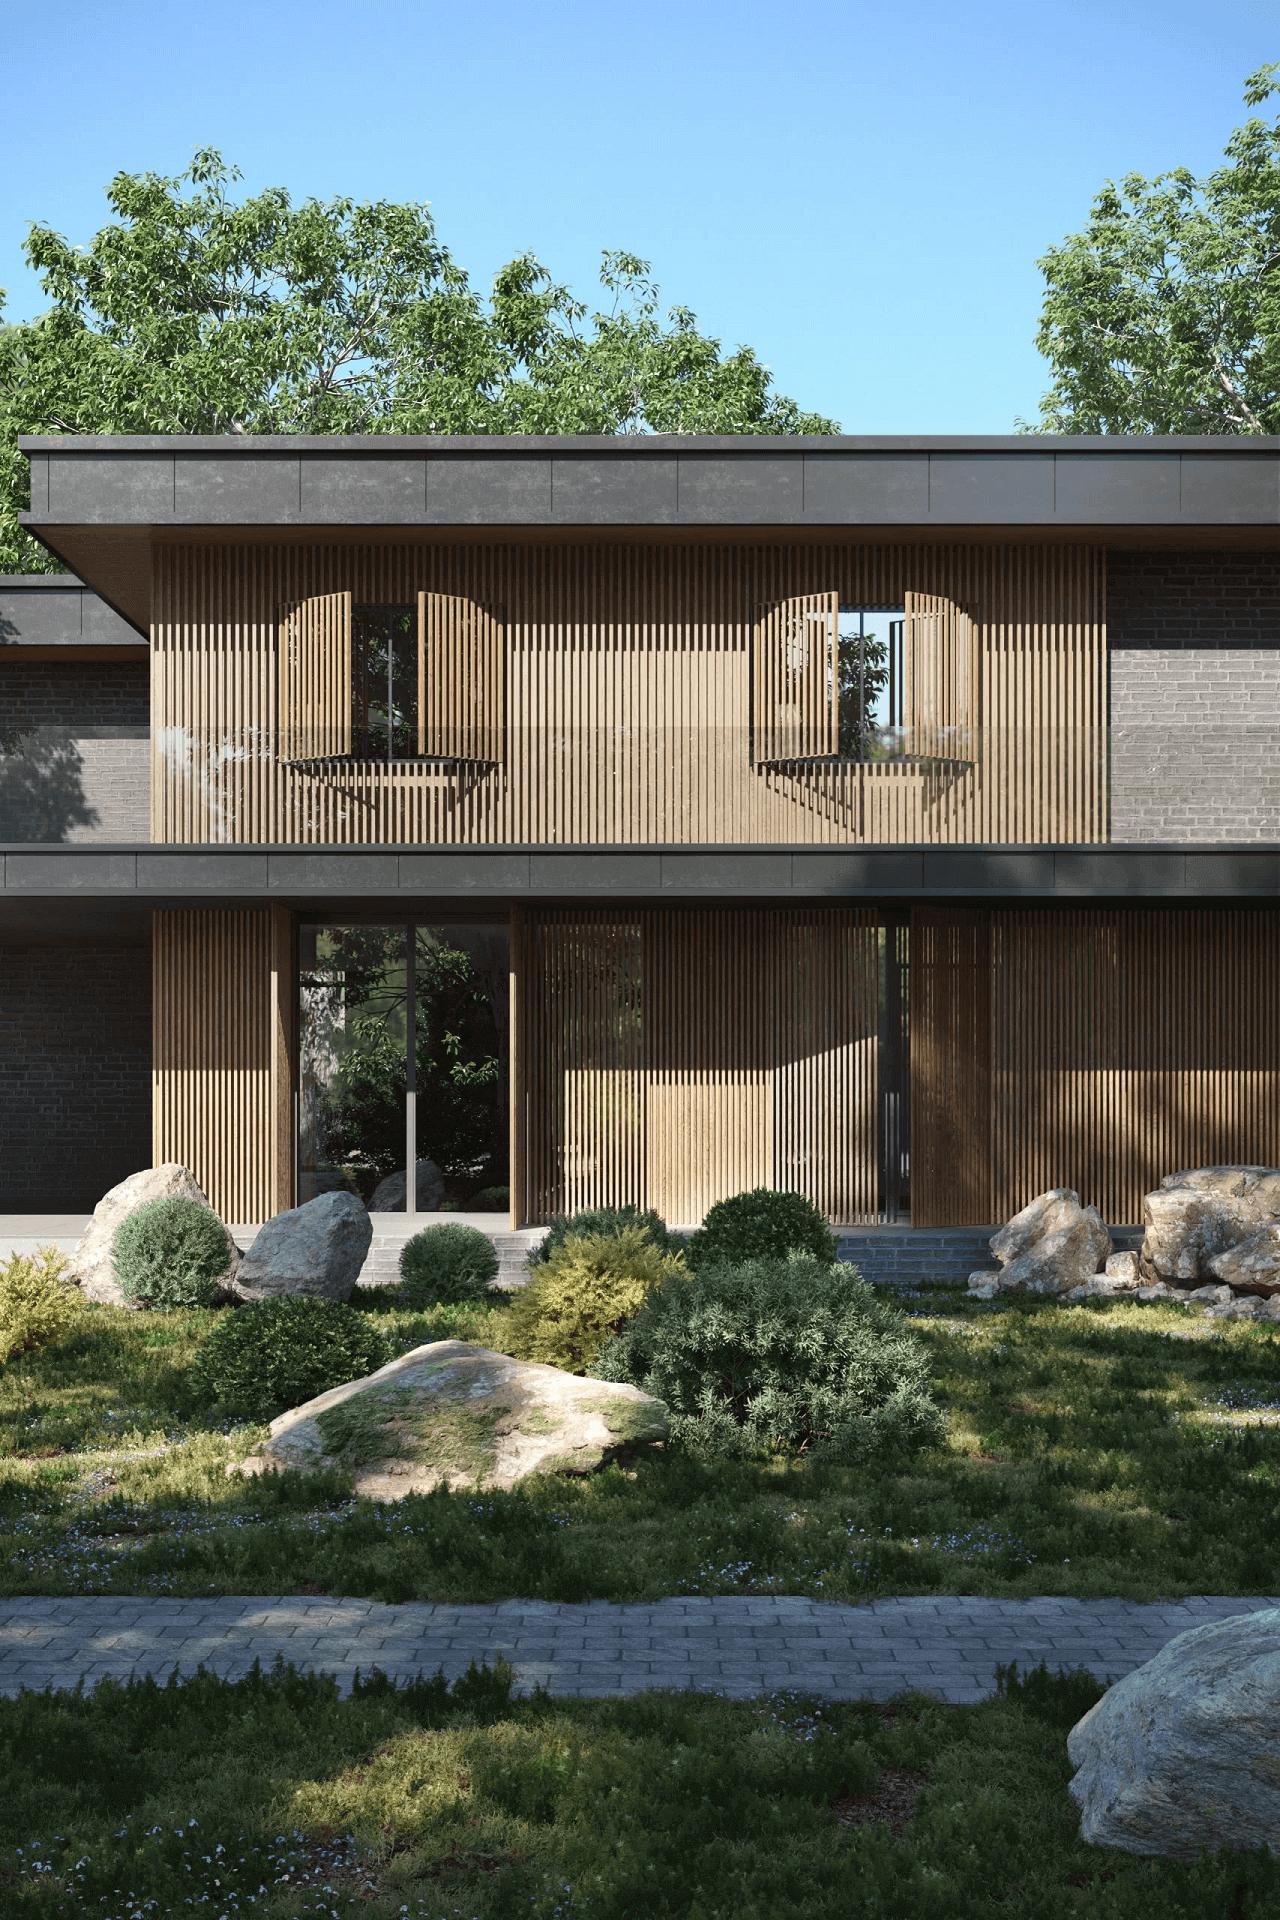 Building Materials in Exterior 3D Visualization